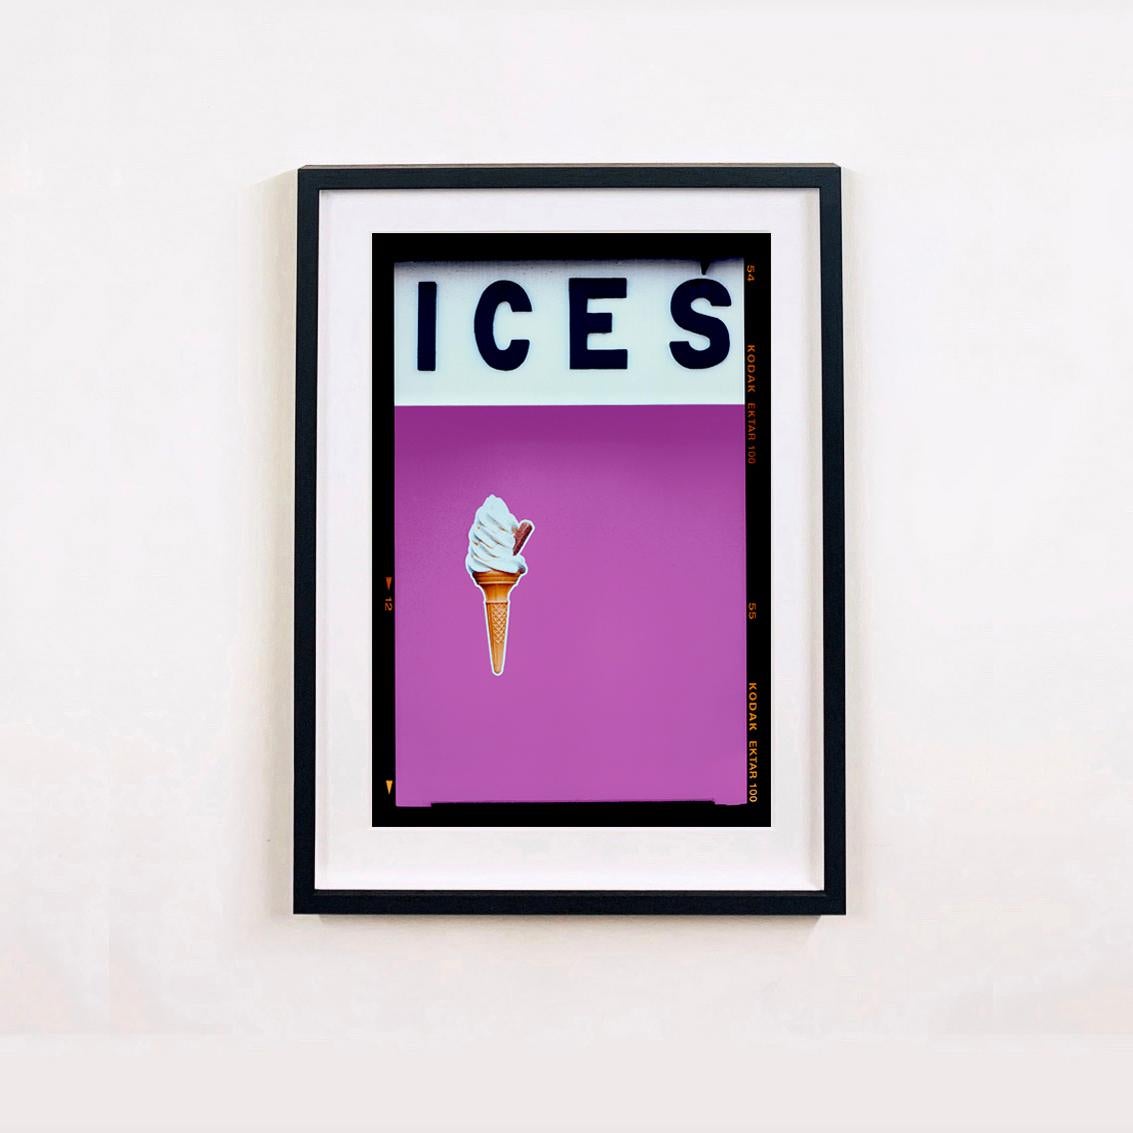 Ices (Plum), Bexhill-on-Sea - British seaside color photography - Photograph by Richard Heeps